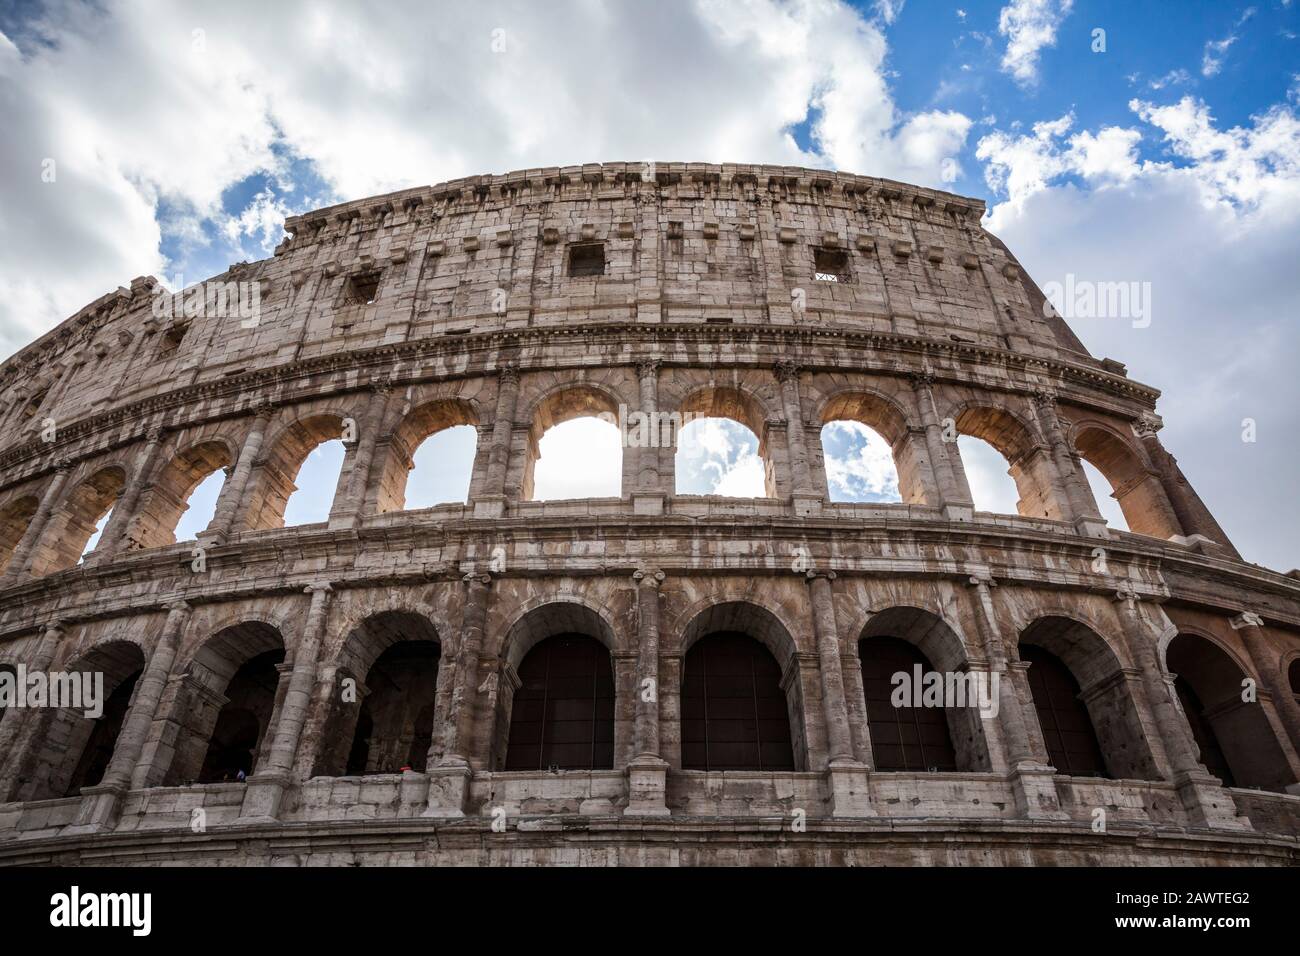 An exterior shot of part of the Colosseum in Rome, Italy. Stock Photo